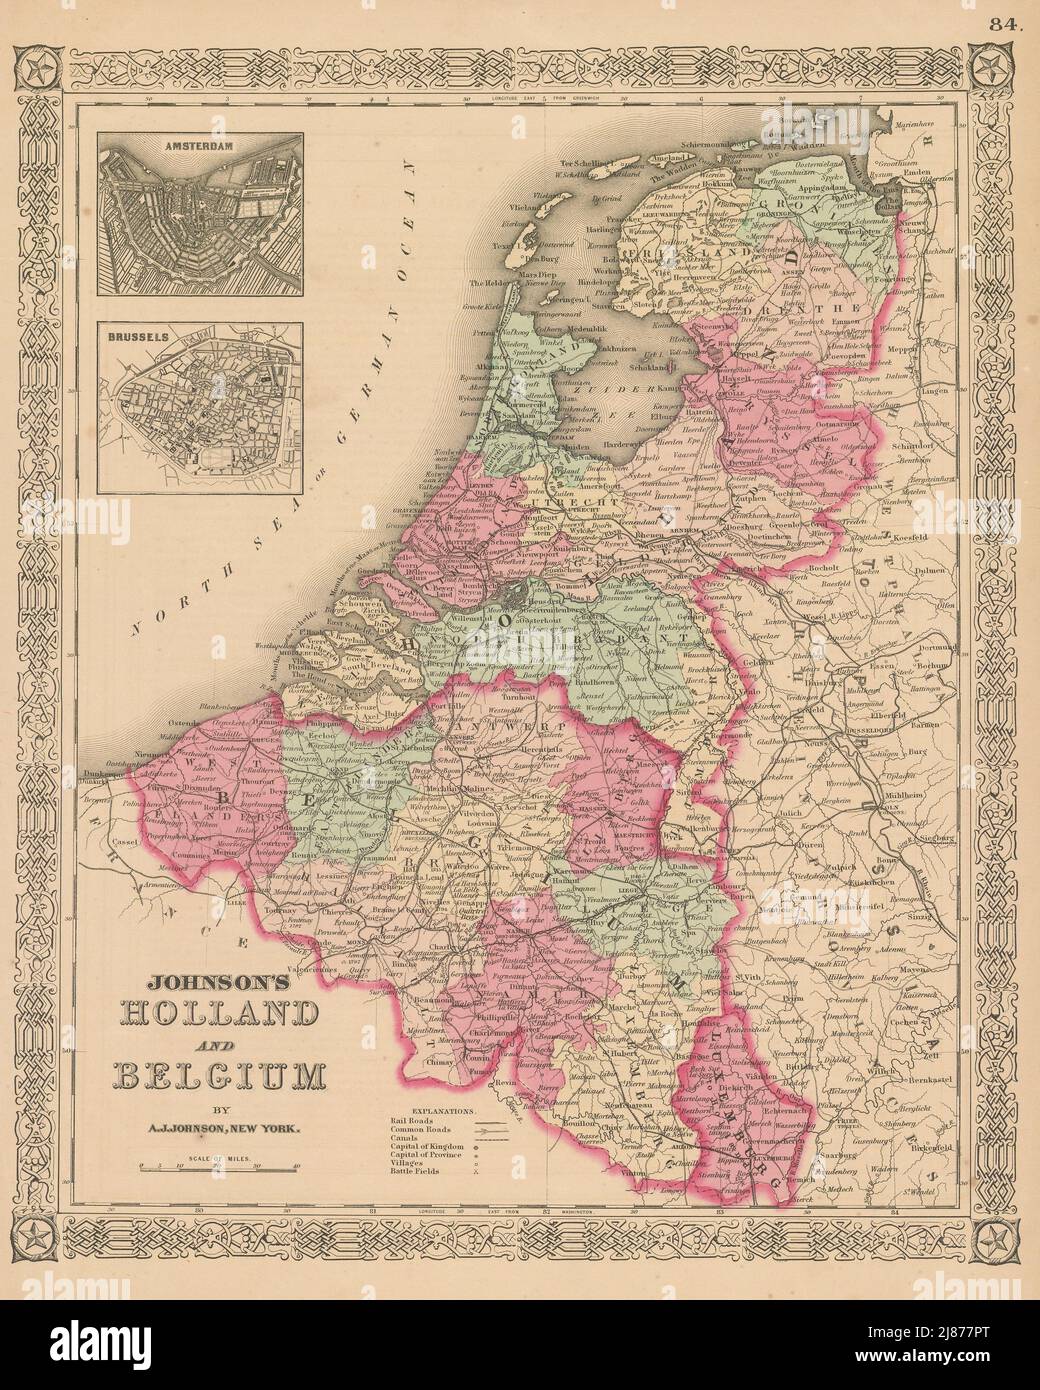 Johnson's Holland and Belgium. Benelux. Amsterdam & Brussels 1867 old map Stock Photo